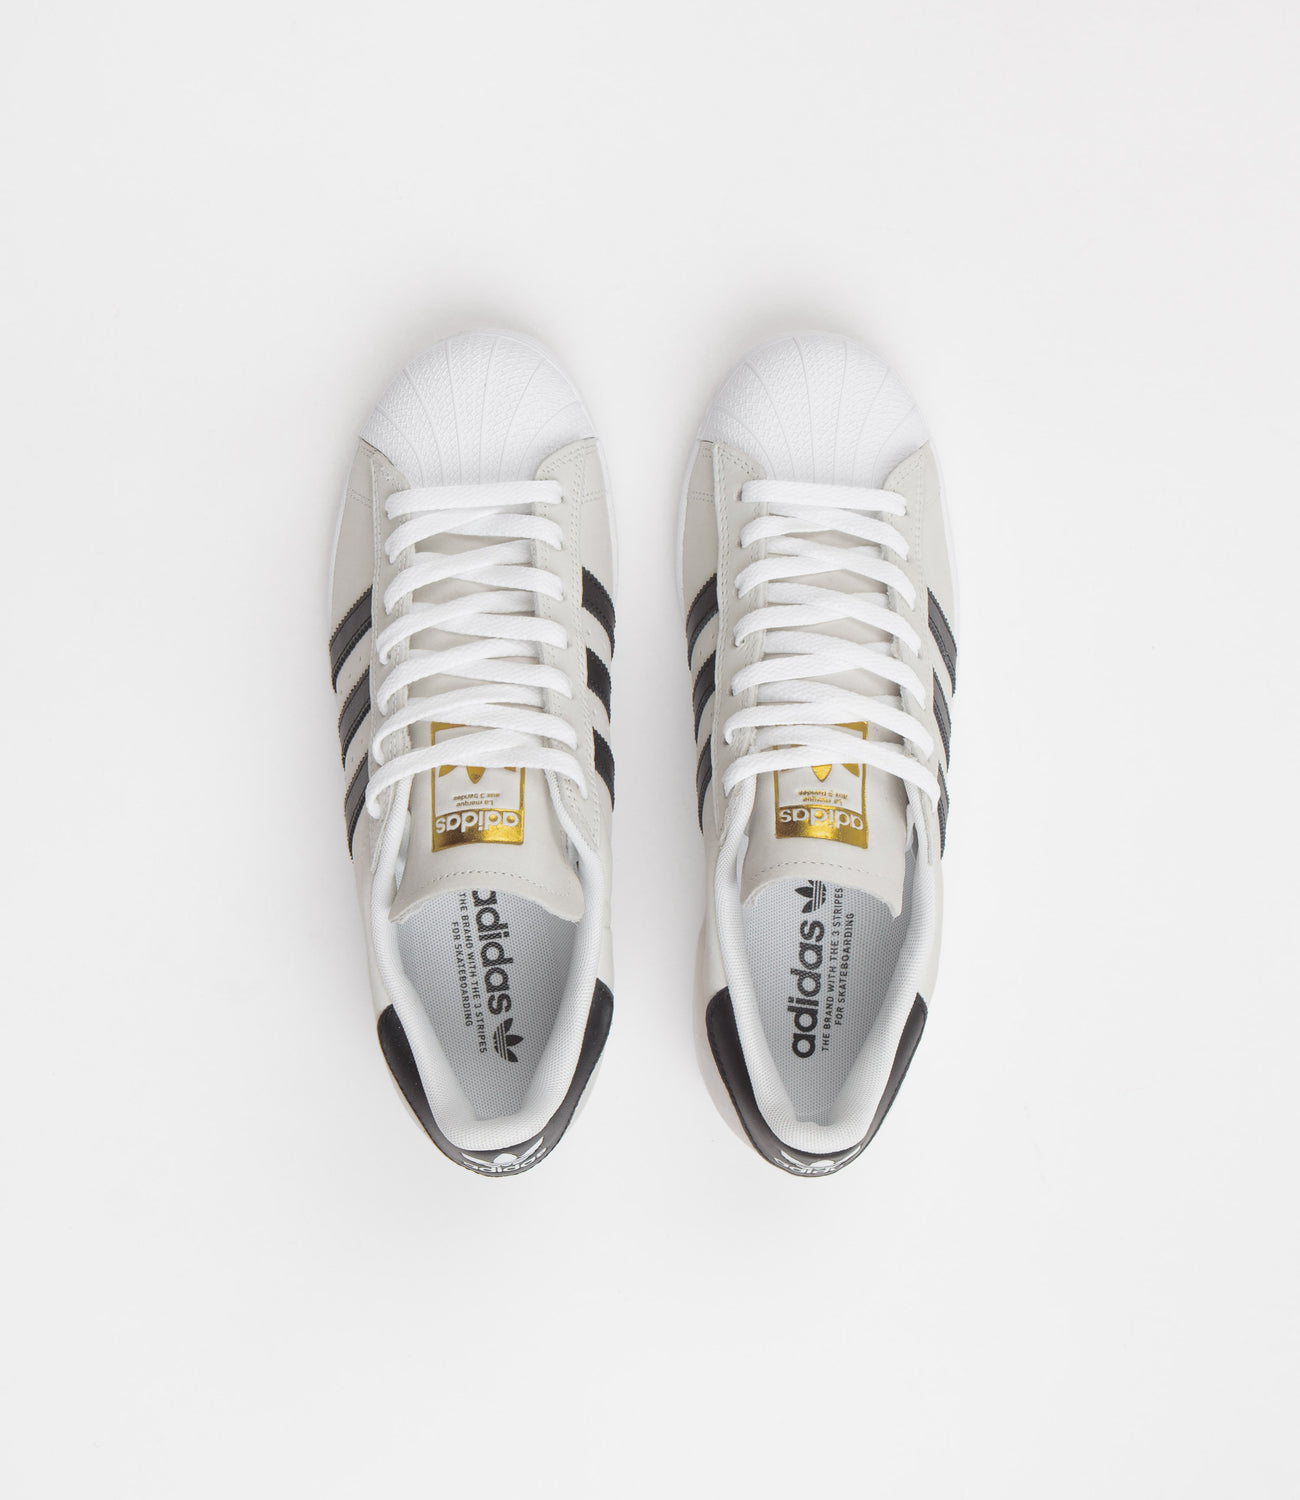 Adidas Originals Wmn's Superstar Slip-on Effortless style meets endless  comfort in these adidas Superstar shoes. Slip into the iconic... | Instagram